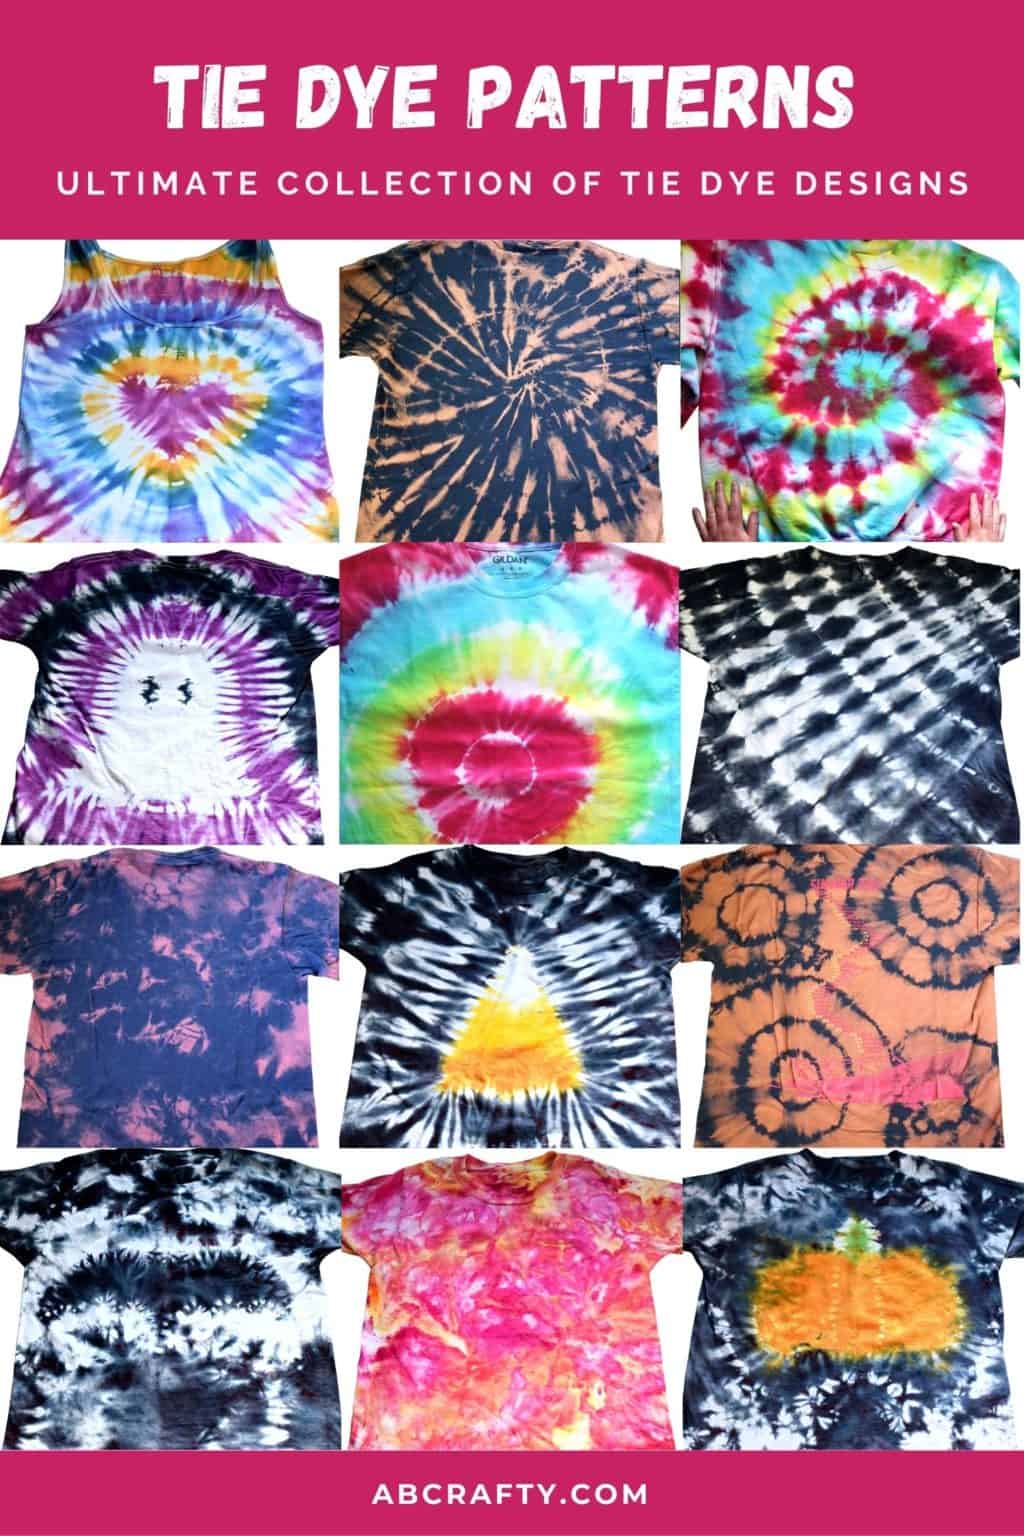 12 different tie dye shirts with the title "tie dye patterns - ultimate collection of tie dye designs, abcrafty.com"